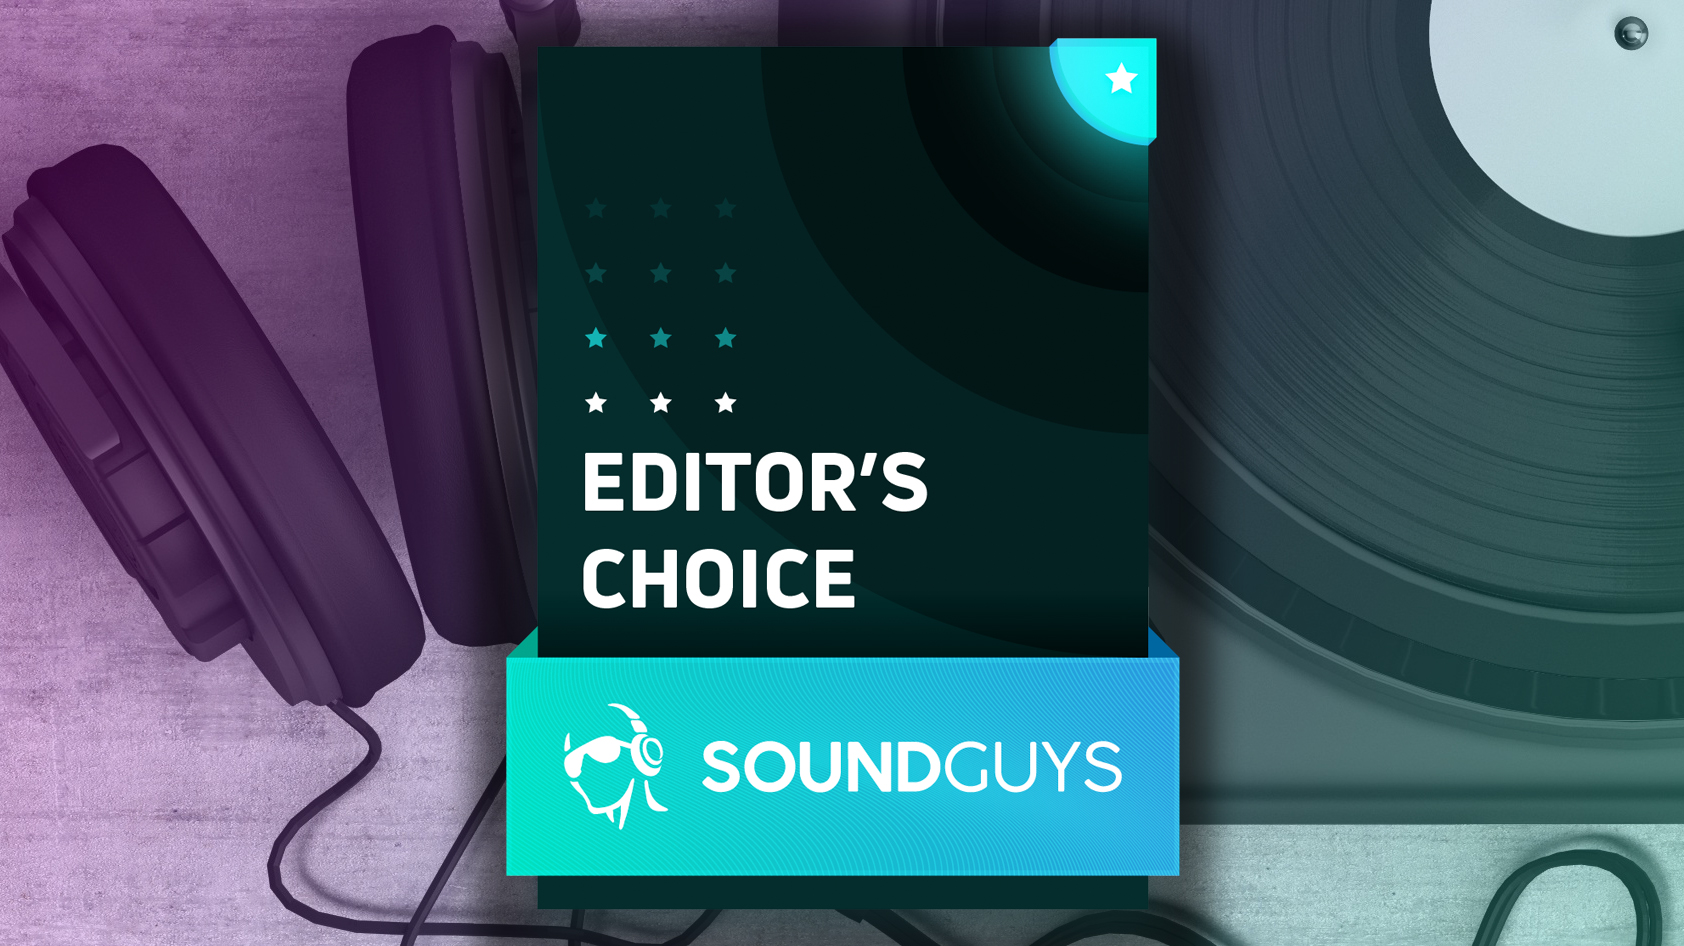 An image of the SoundGuys Editor's Choice badge over a background of headphones, a turntable, and a cable.